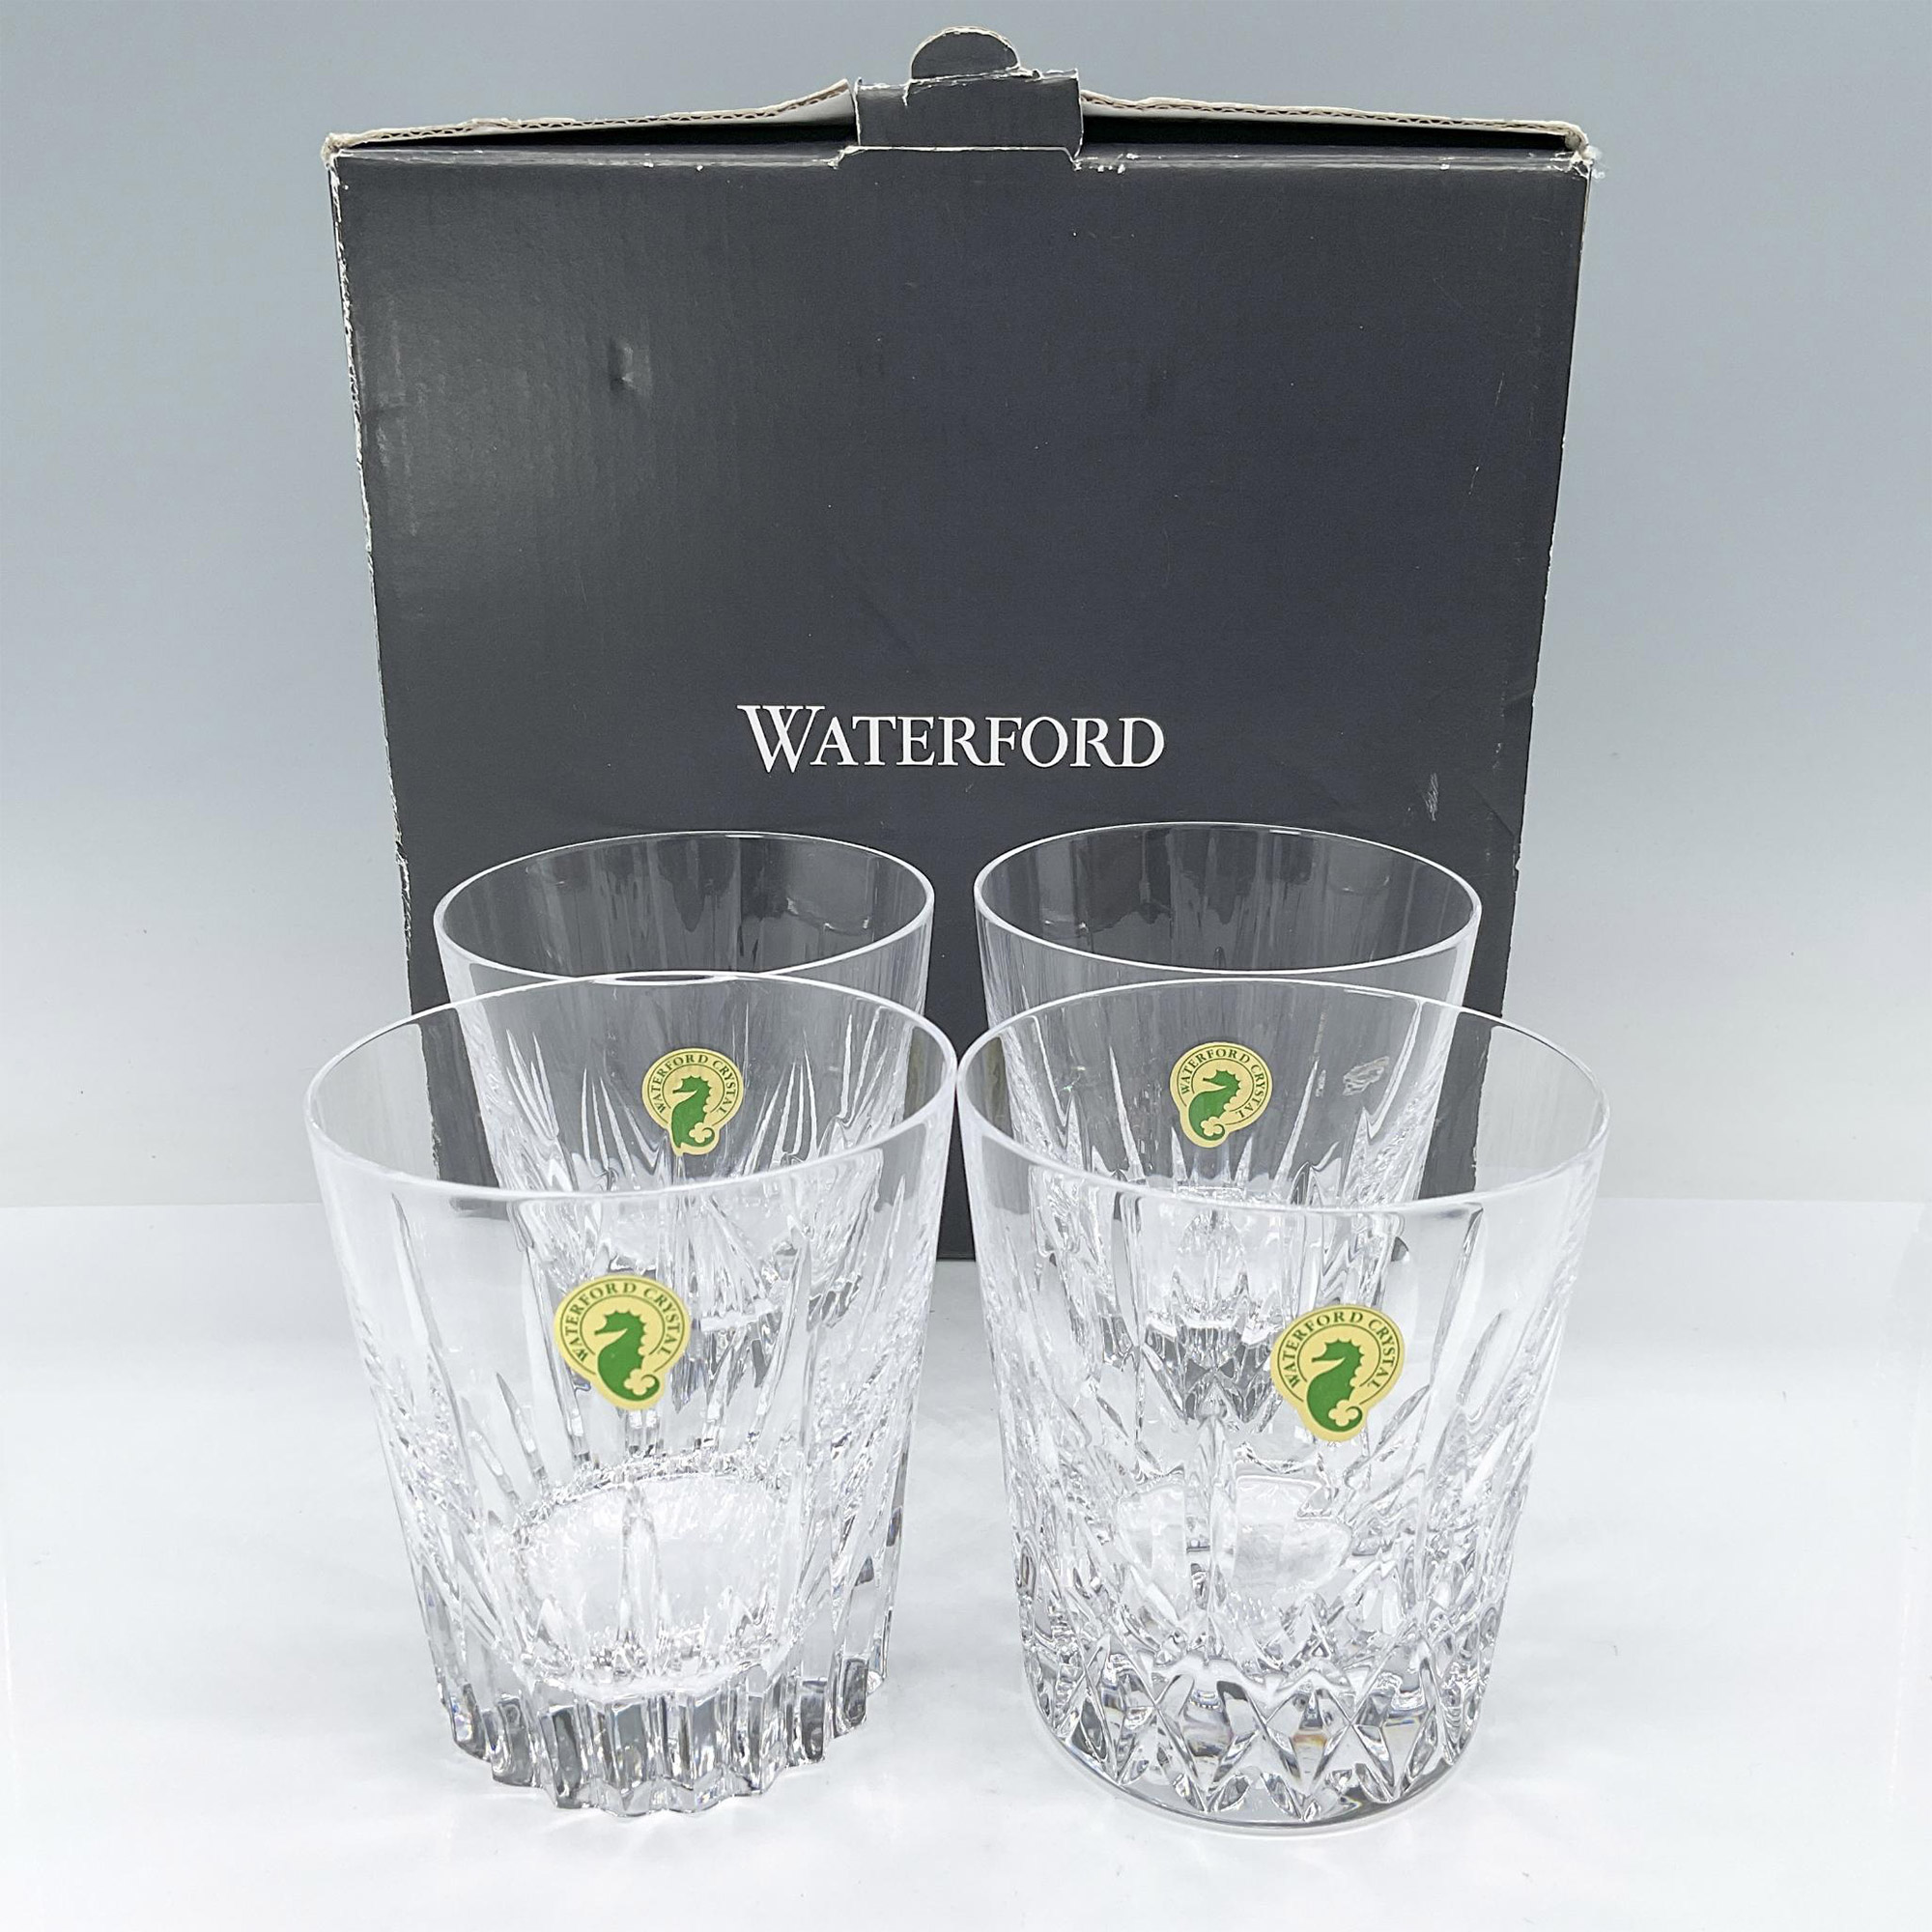 4pc Waterford Crystal Rocks Glasses, Mixed Patterns Set - Image 4 of 4